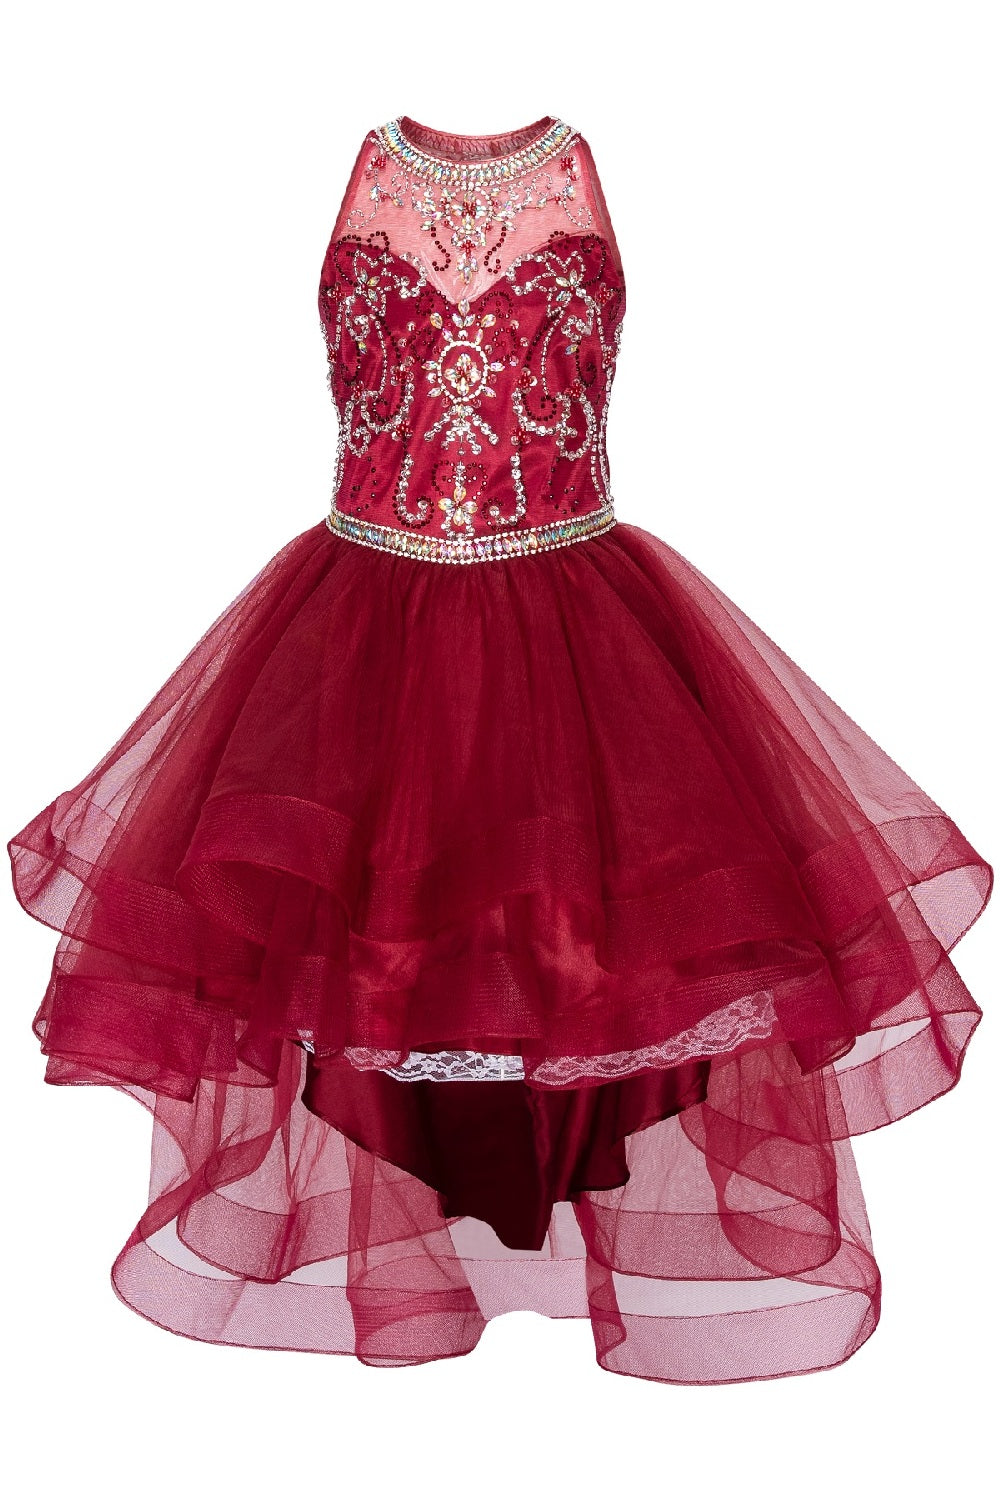 Cinderella Couture Girls Multi Color Crystal Pearl Halter Pageant Dress 4-16 - SophiasStyle.com